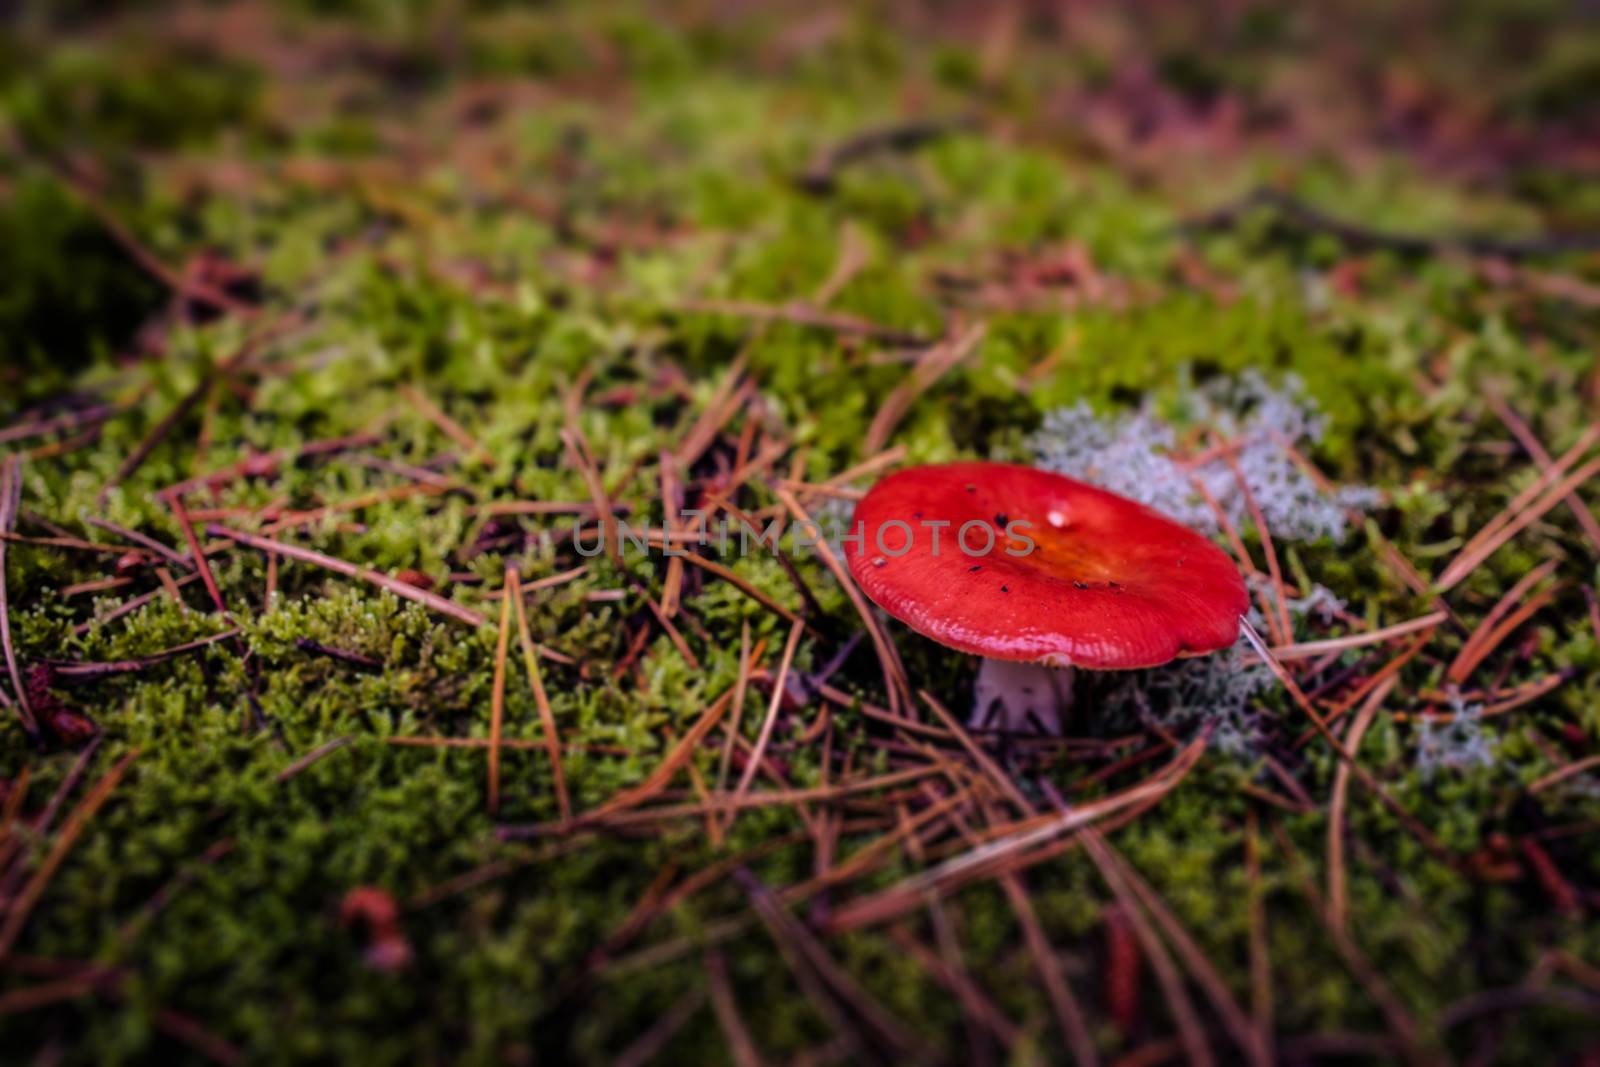 Red fungus by Sportactive